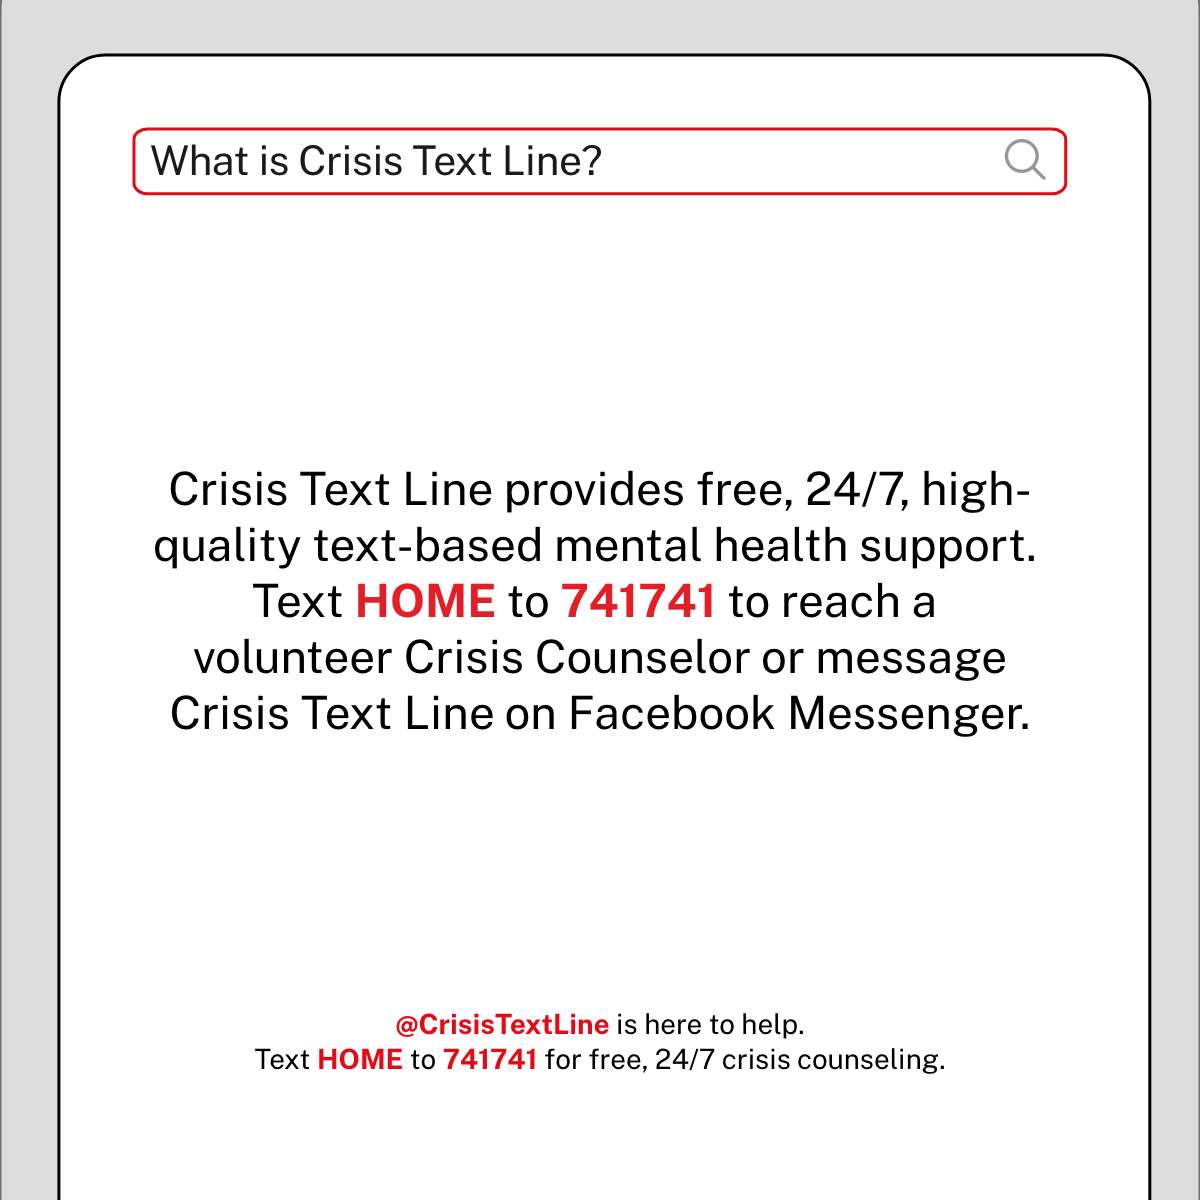 How to use Crisis textline, text HOME to 741741